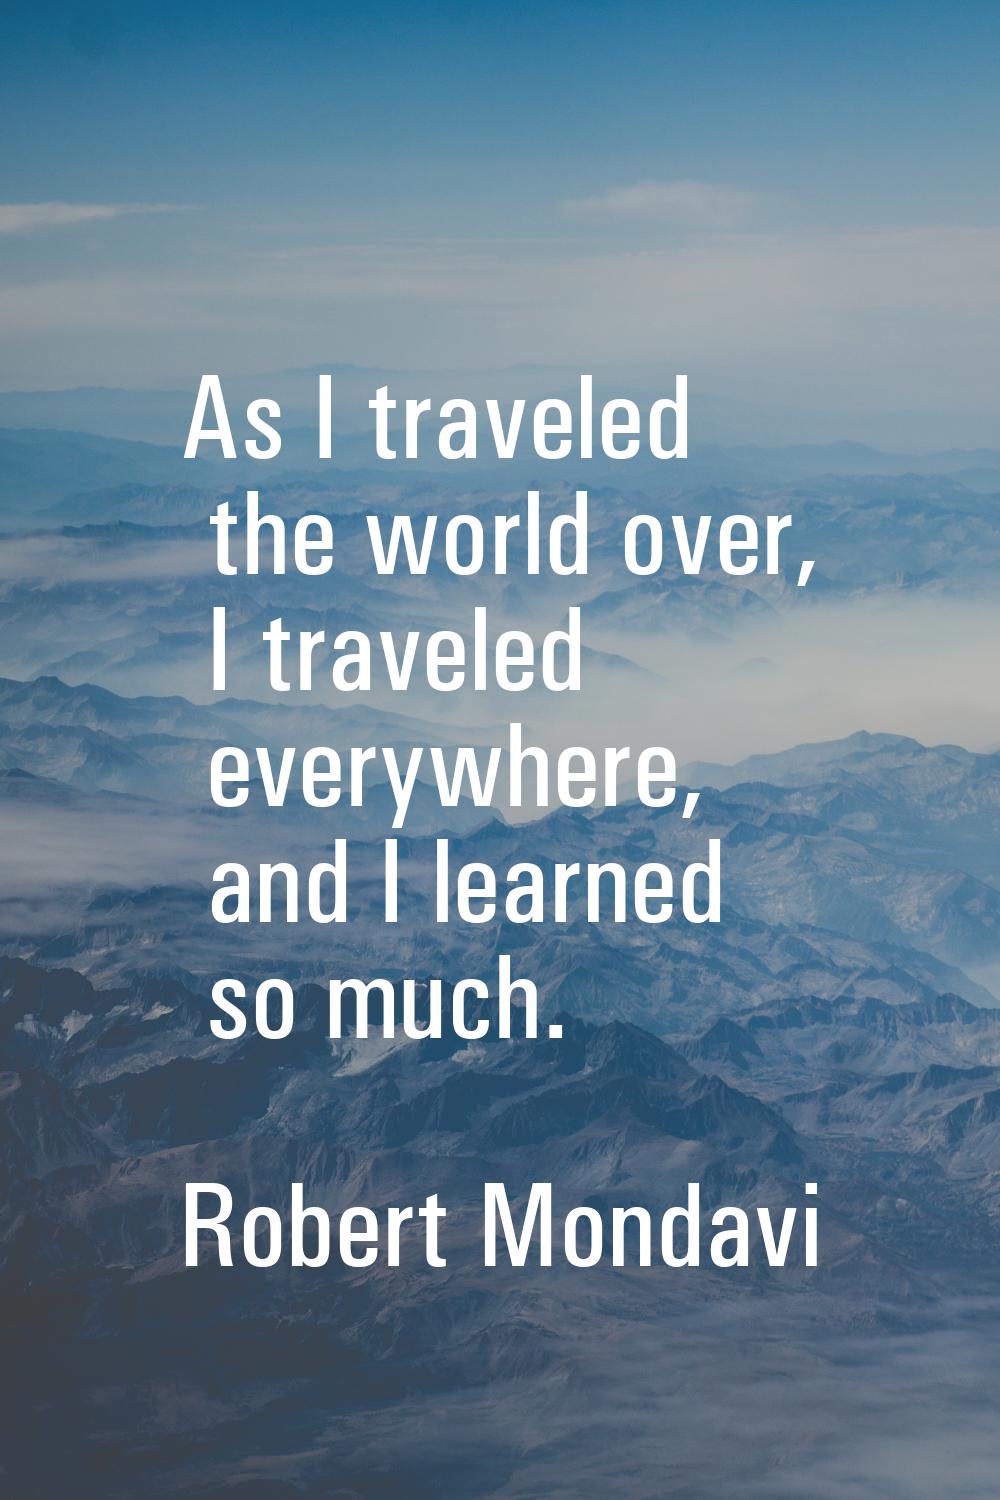 As I traveled the world over, I traveled everywhere, and I learned so much.